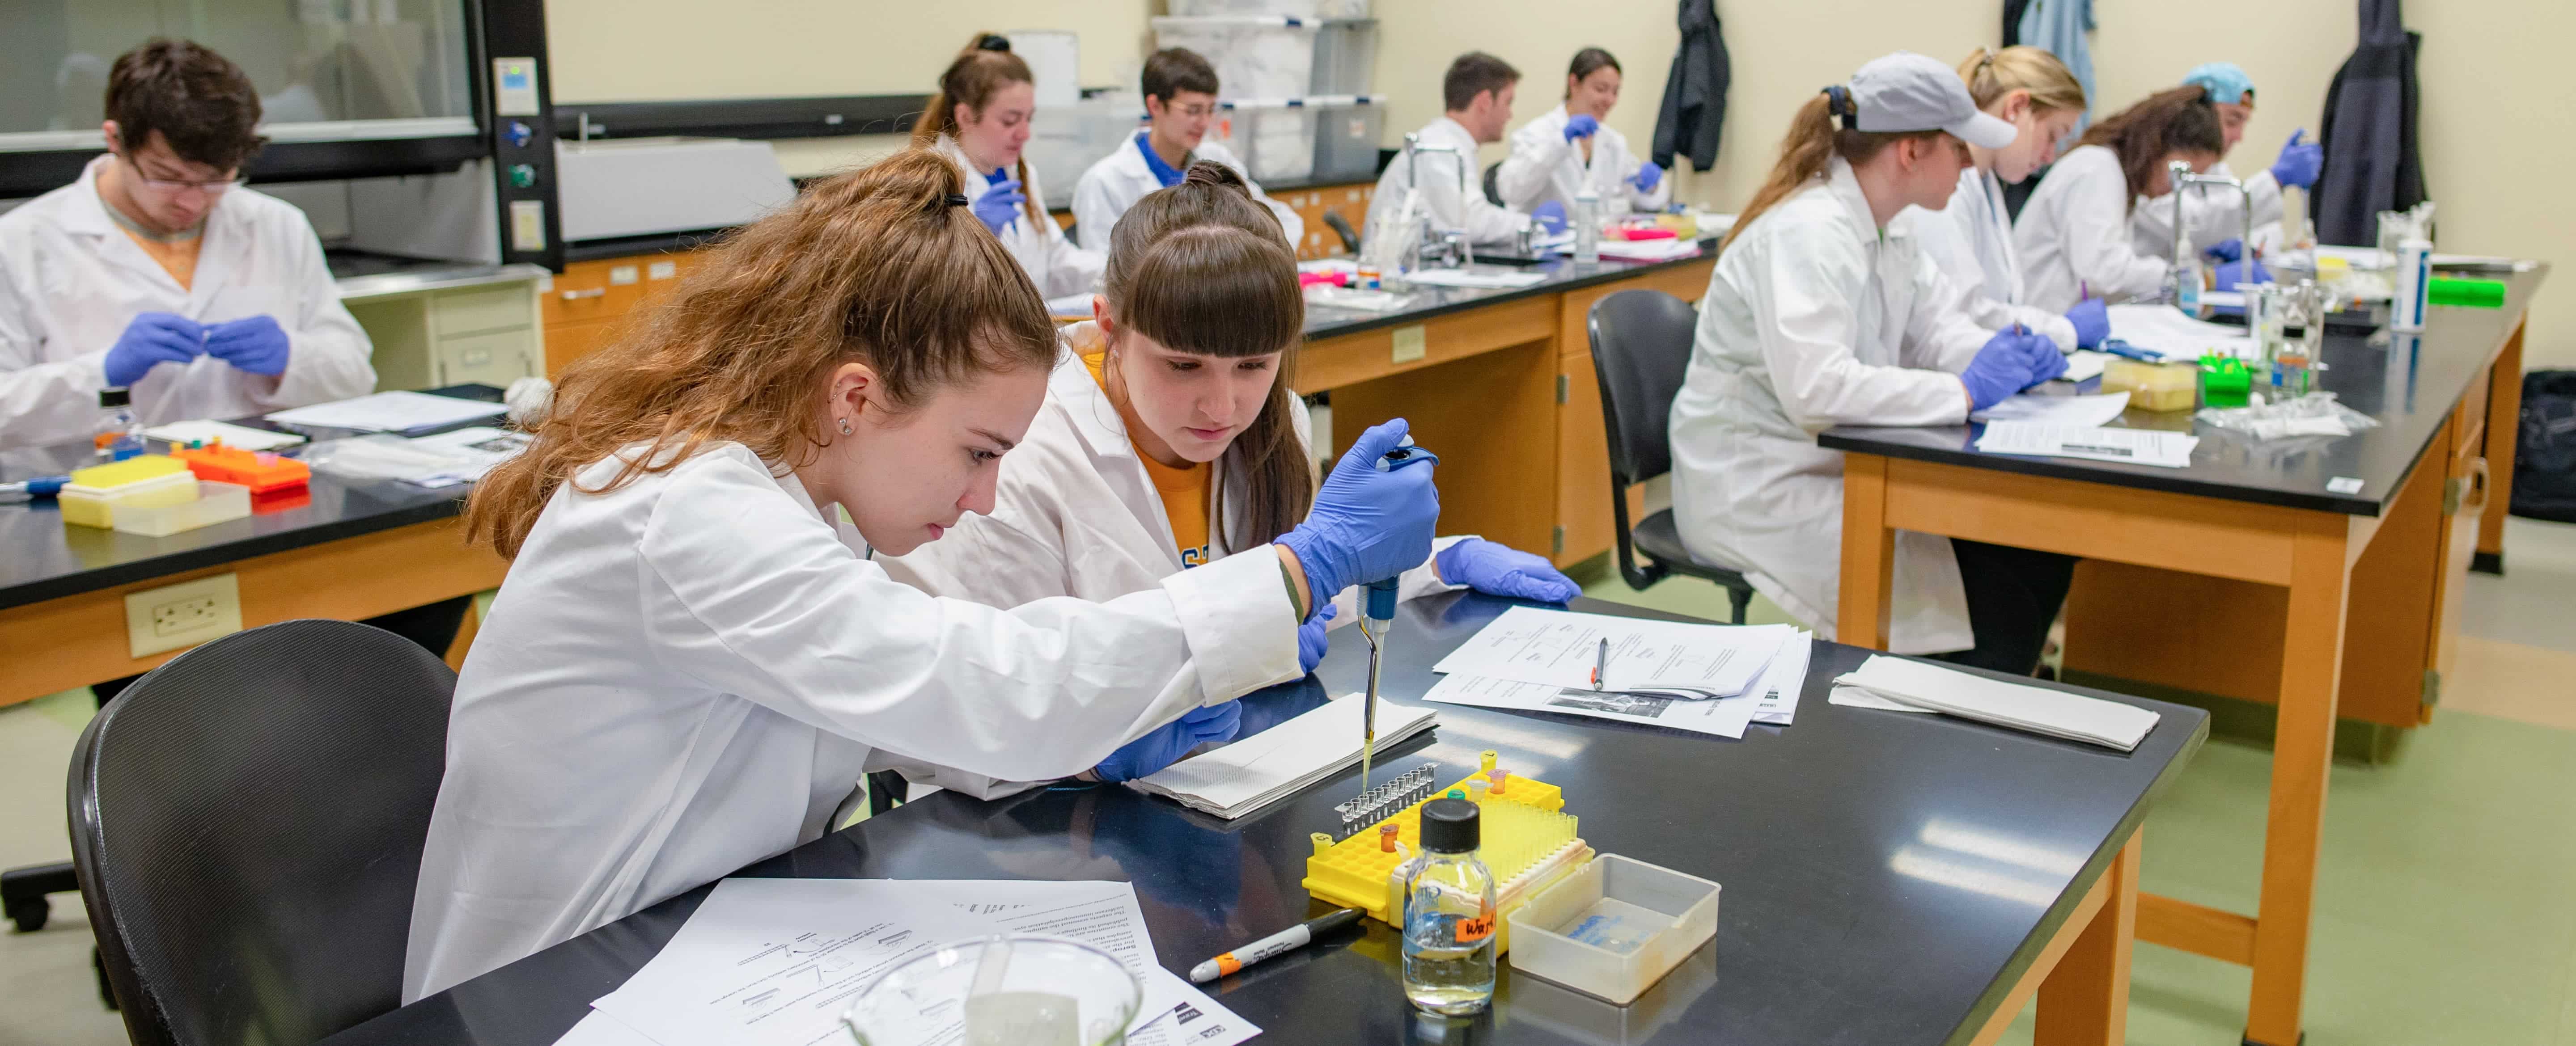 Biology students working in a lab classroom.